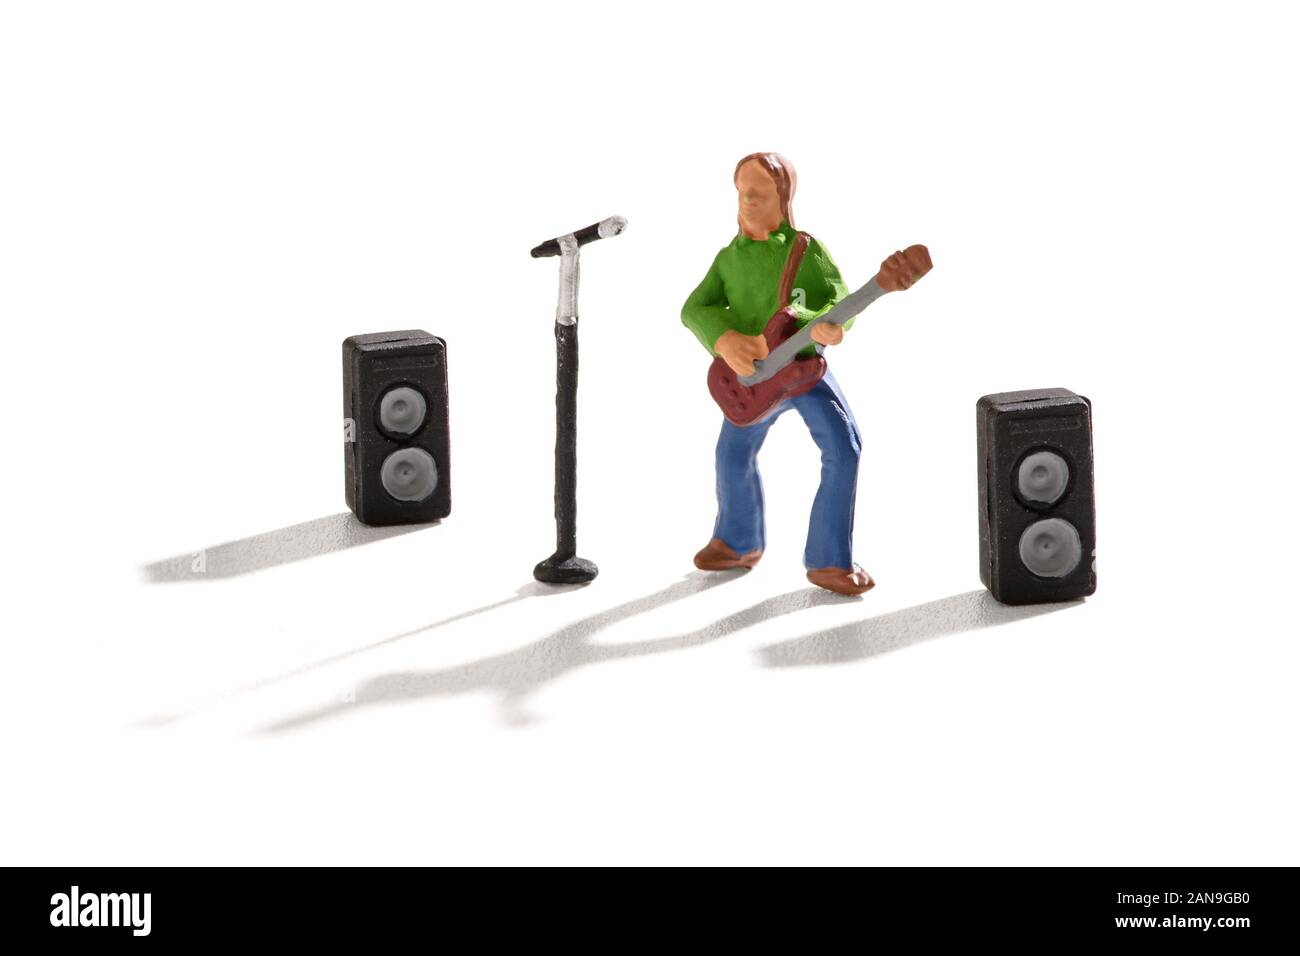 Miniature figure of a rock star playing a guitar and singing in front of a microphone and speakers in an entertainment and rock n roll music concept Stock Photo